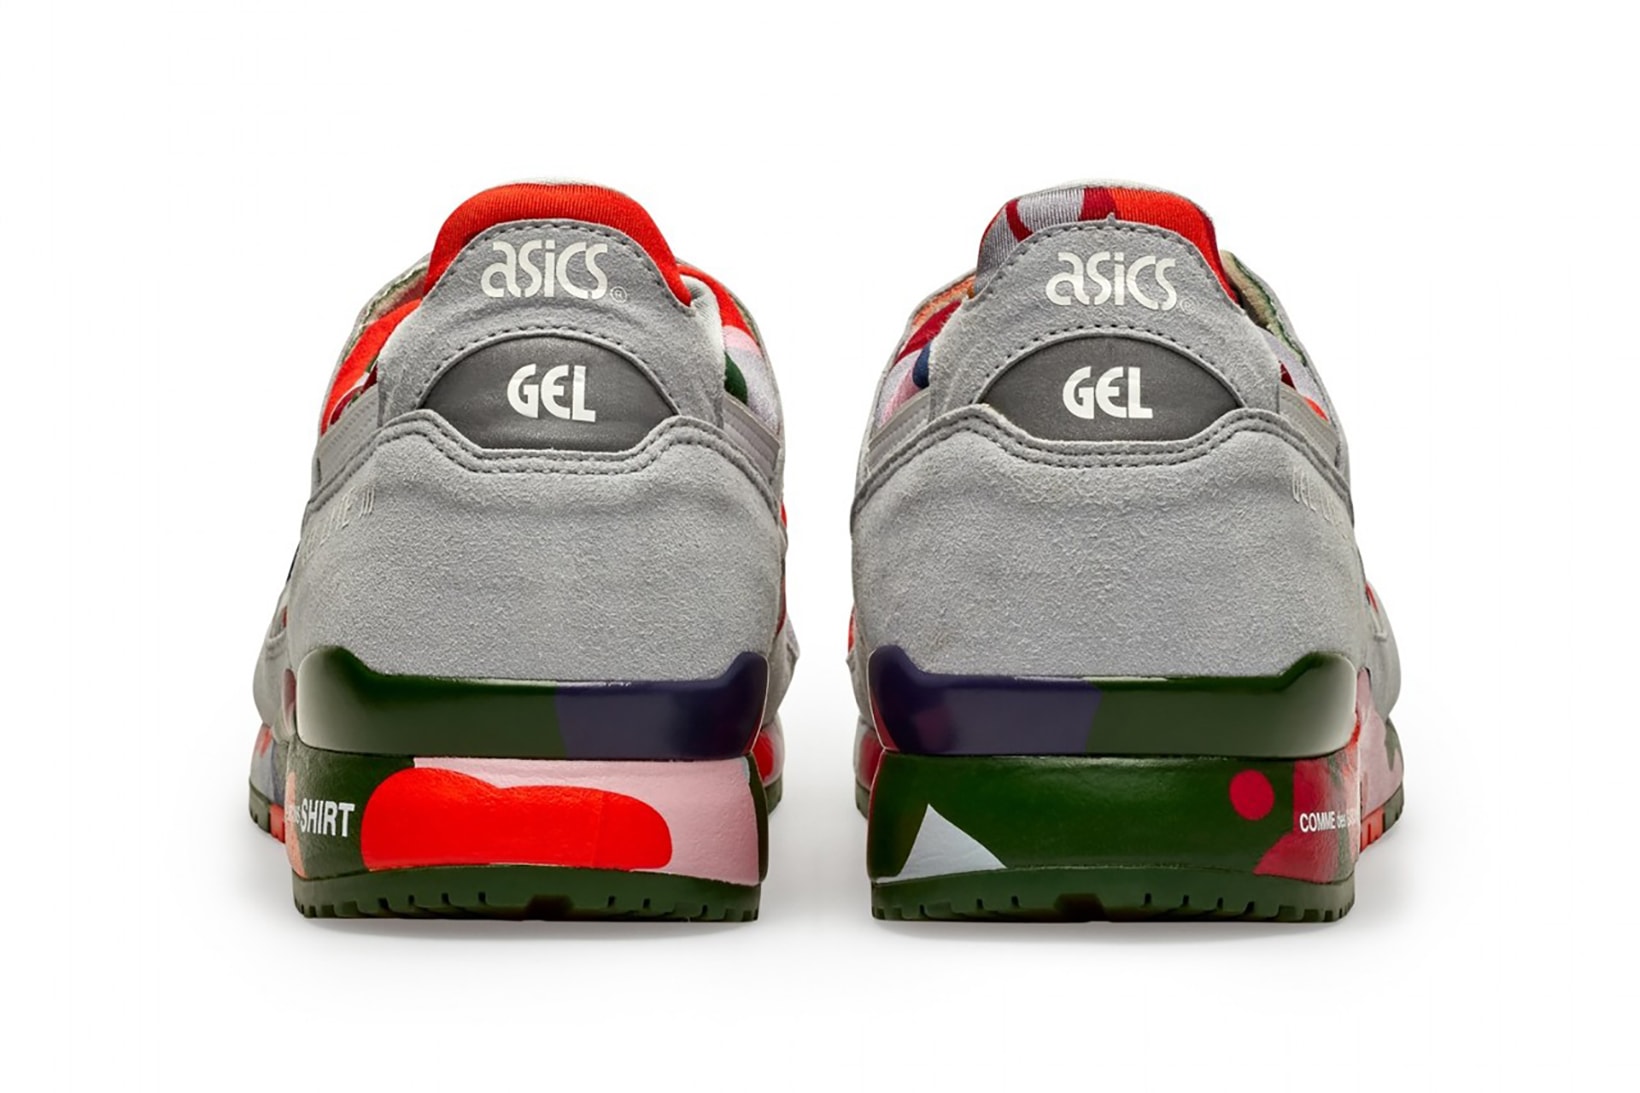 comme des garcons shirt asics collaboration gel lyte iii sneakers camo gray red green pink shoes footwear sneakerhead